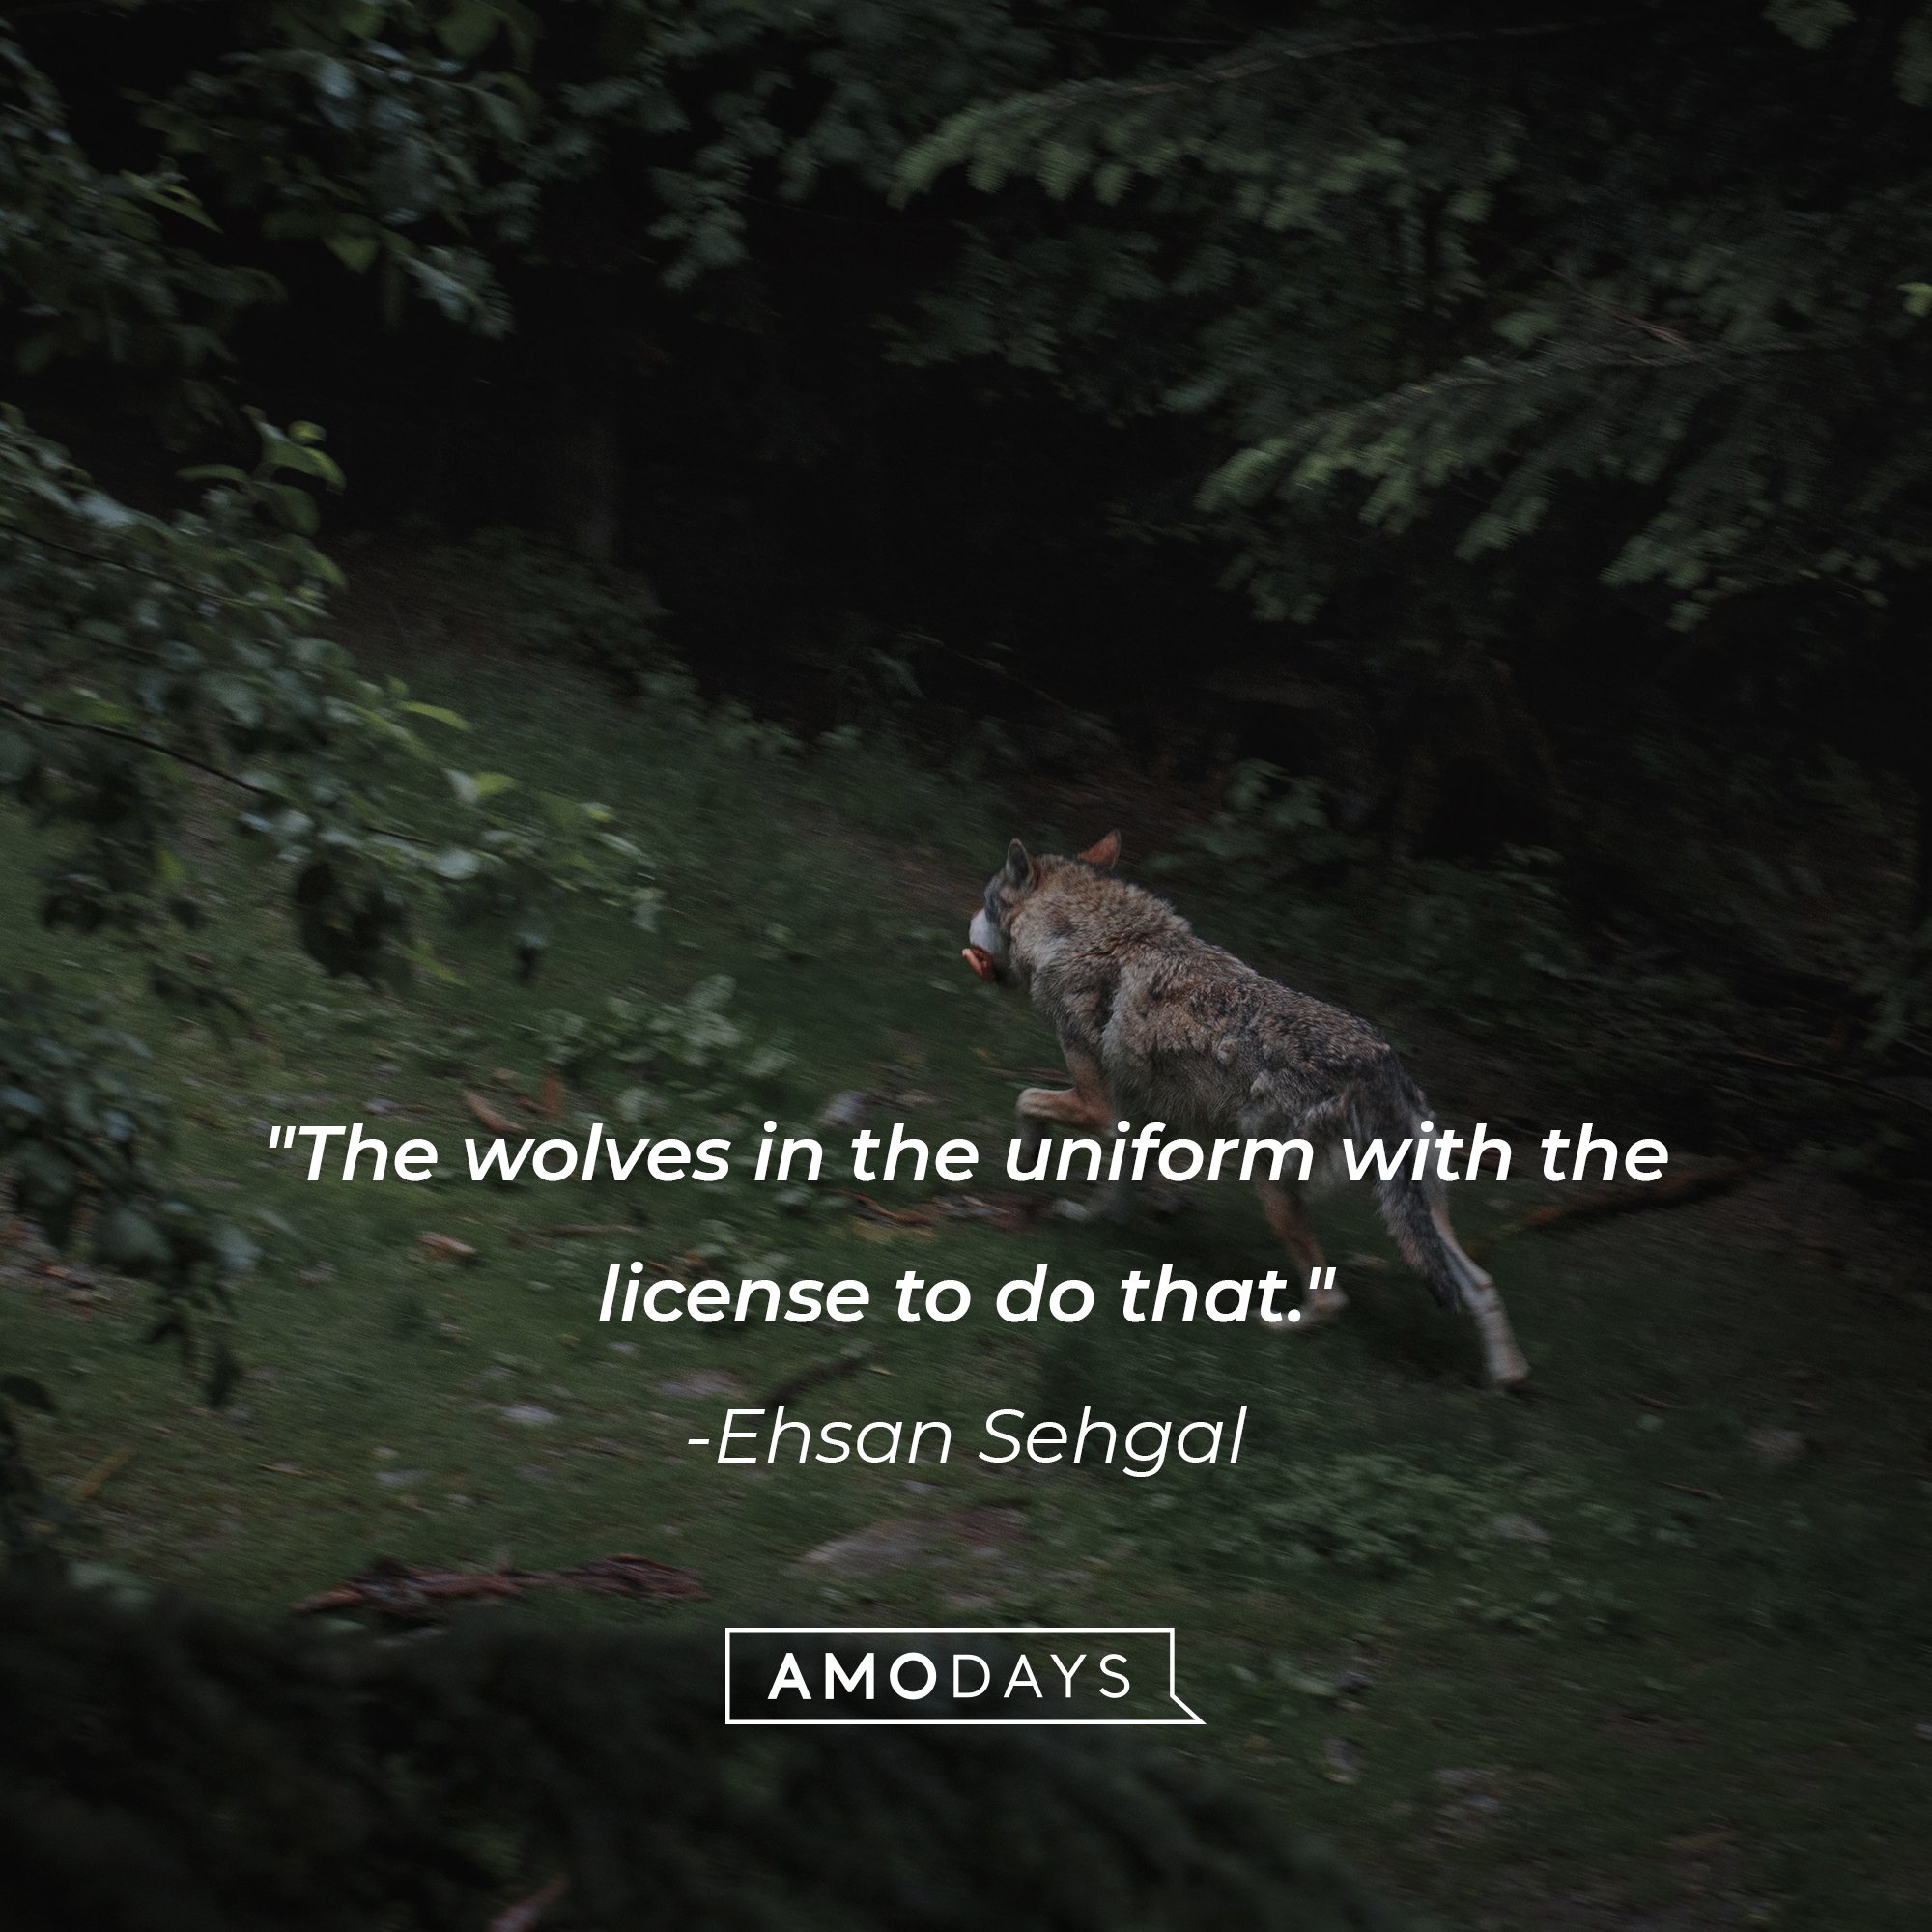  Ehsan Sehgal's quote: "The wolves in the uniform with the license to do that."  | Image: AmoDays